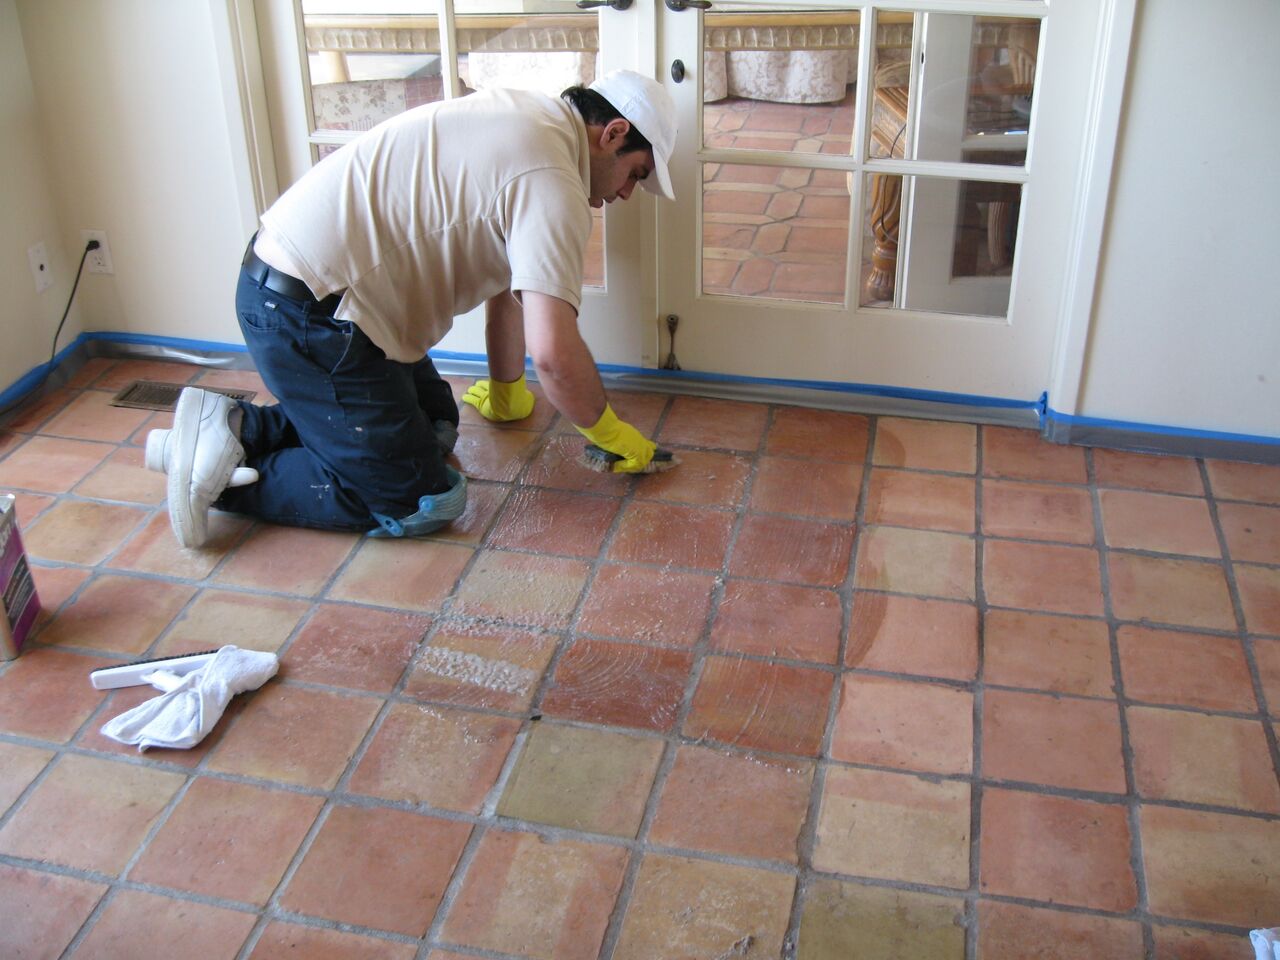 Saltillo tile floor cleaner tile grout cleaner grout cleaning and sealing companies grout repair tile cleaning services orange county newport beach